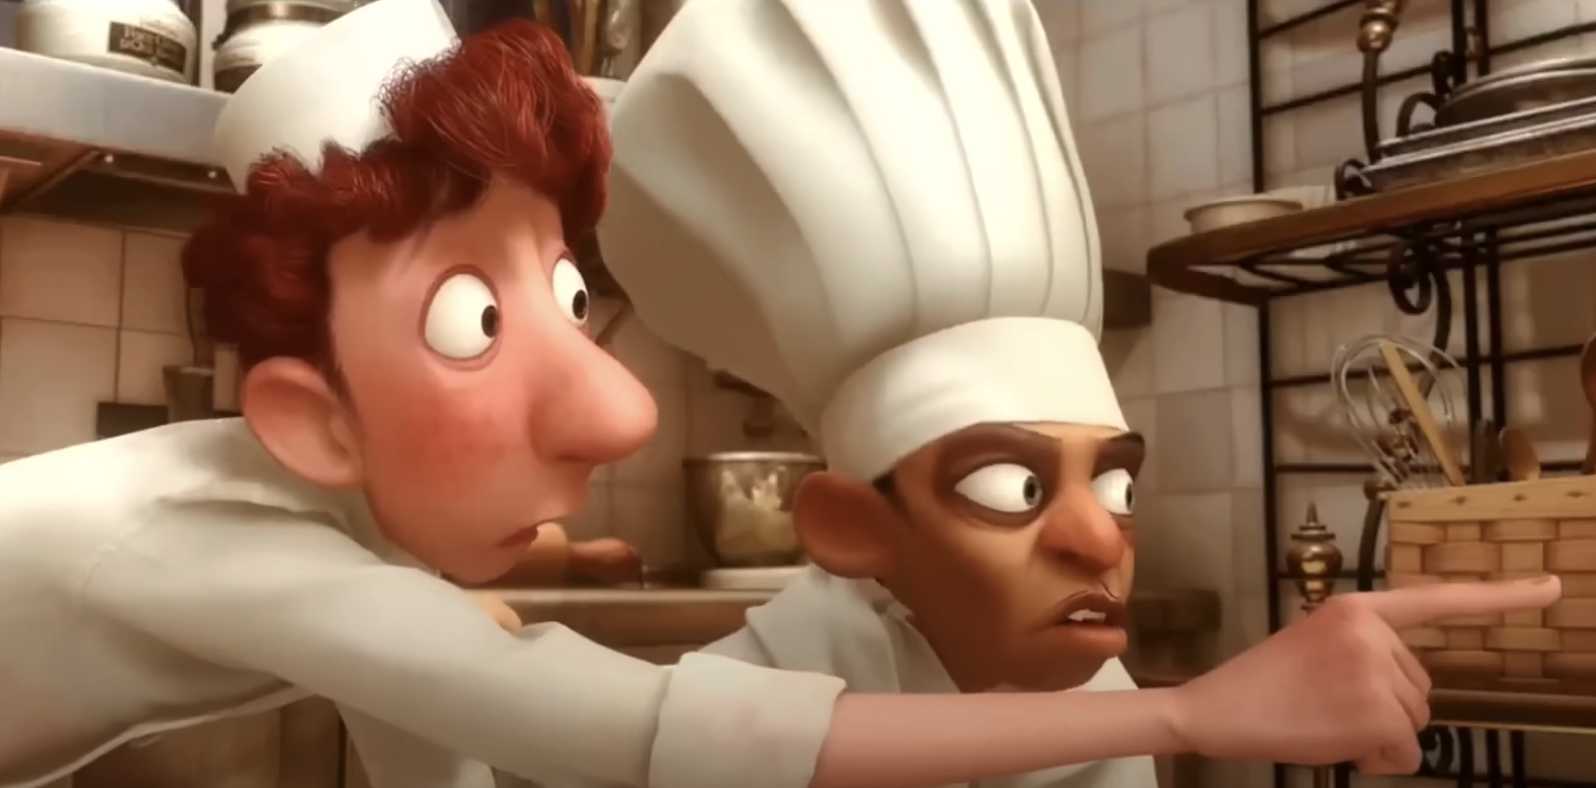 Animated characters Linguini and Chef Skinner in a kitchen from the movie Ratatouille. Skinner is pointing angrily